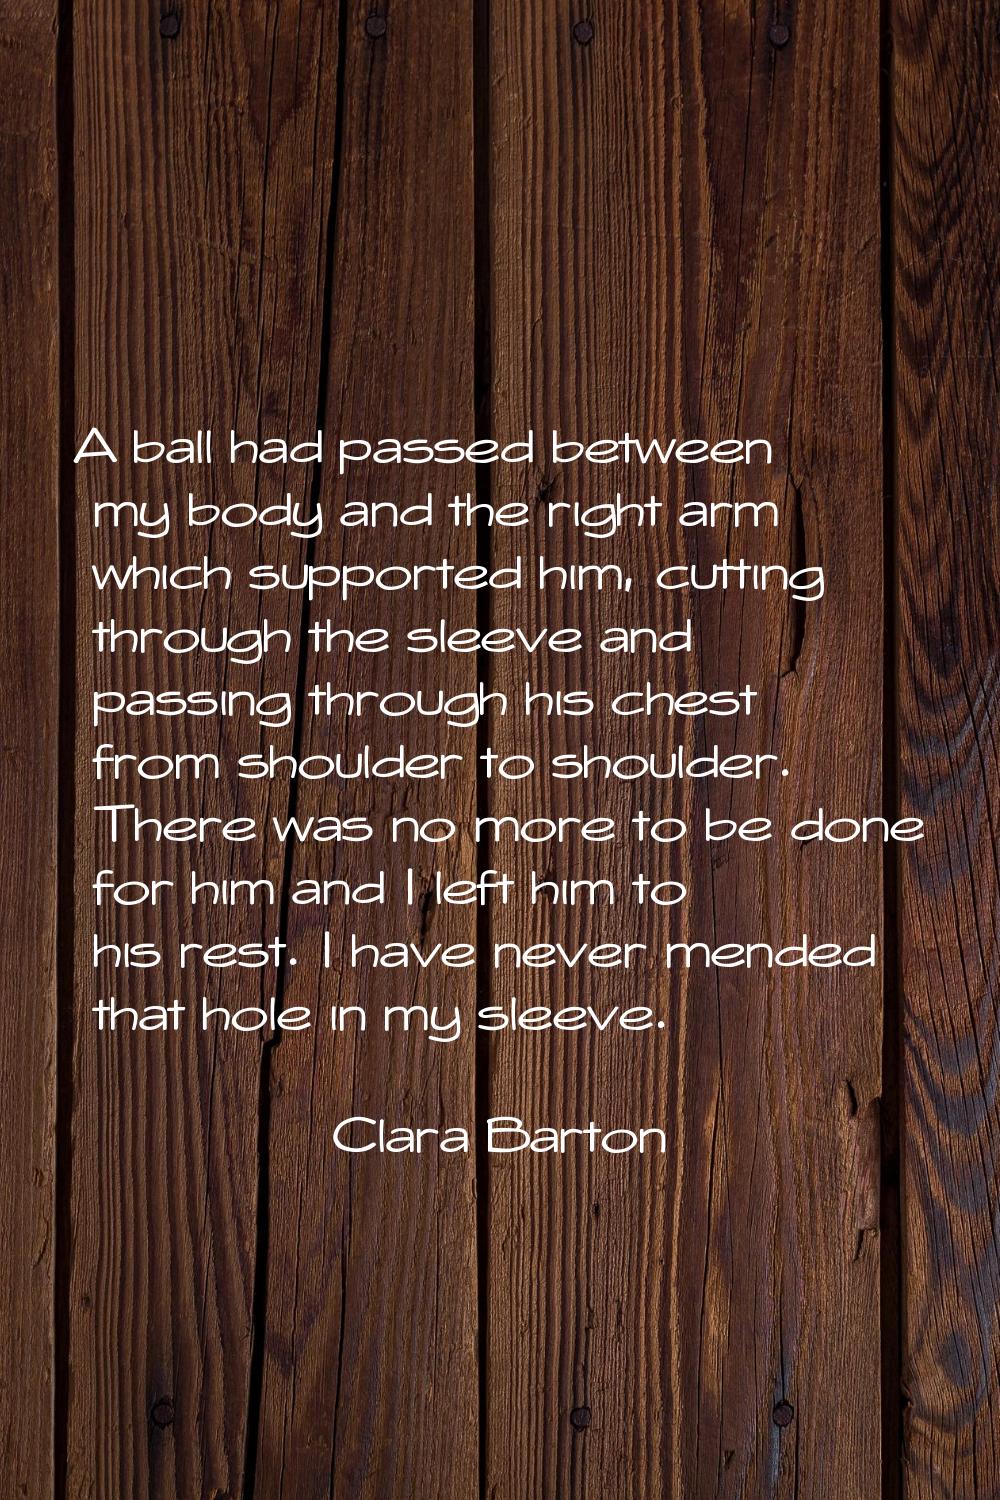 A ball had passed between my body and the right arm which supported him, cutting through the sleeve